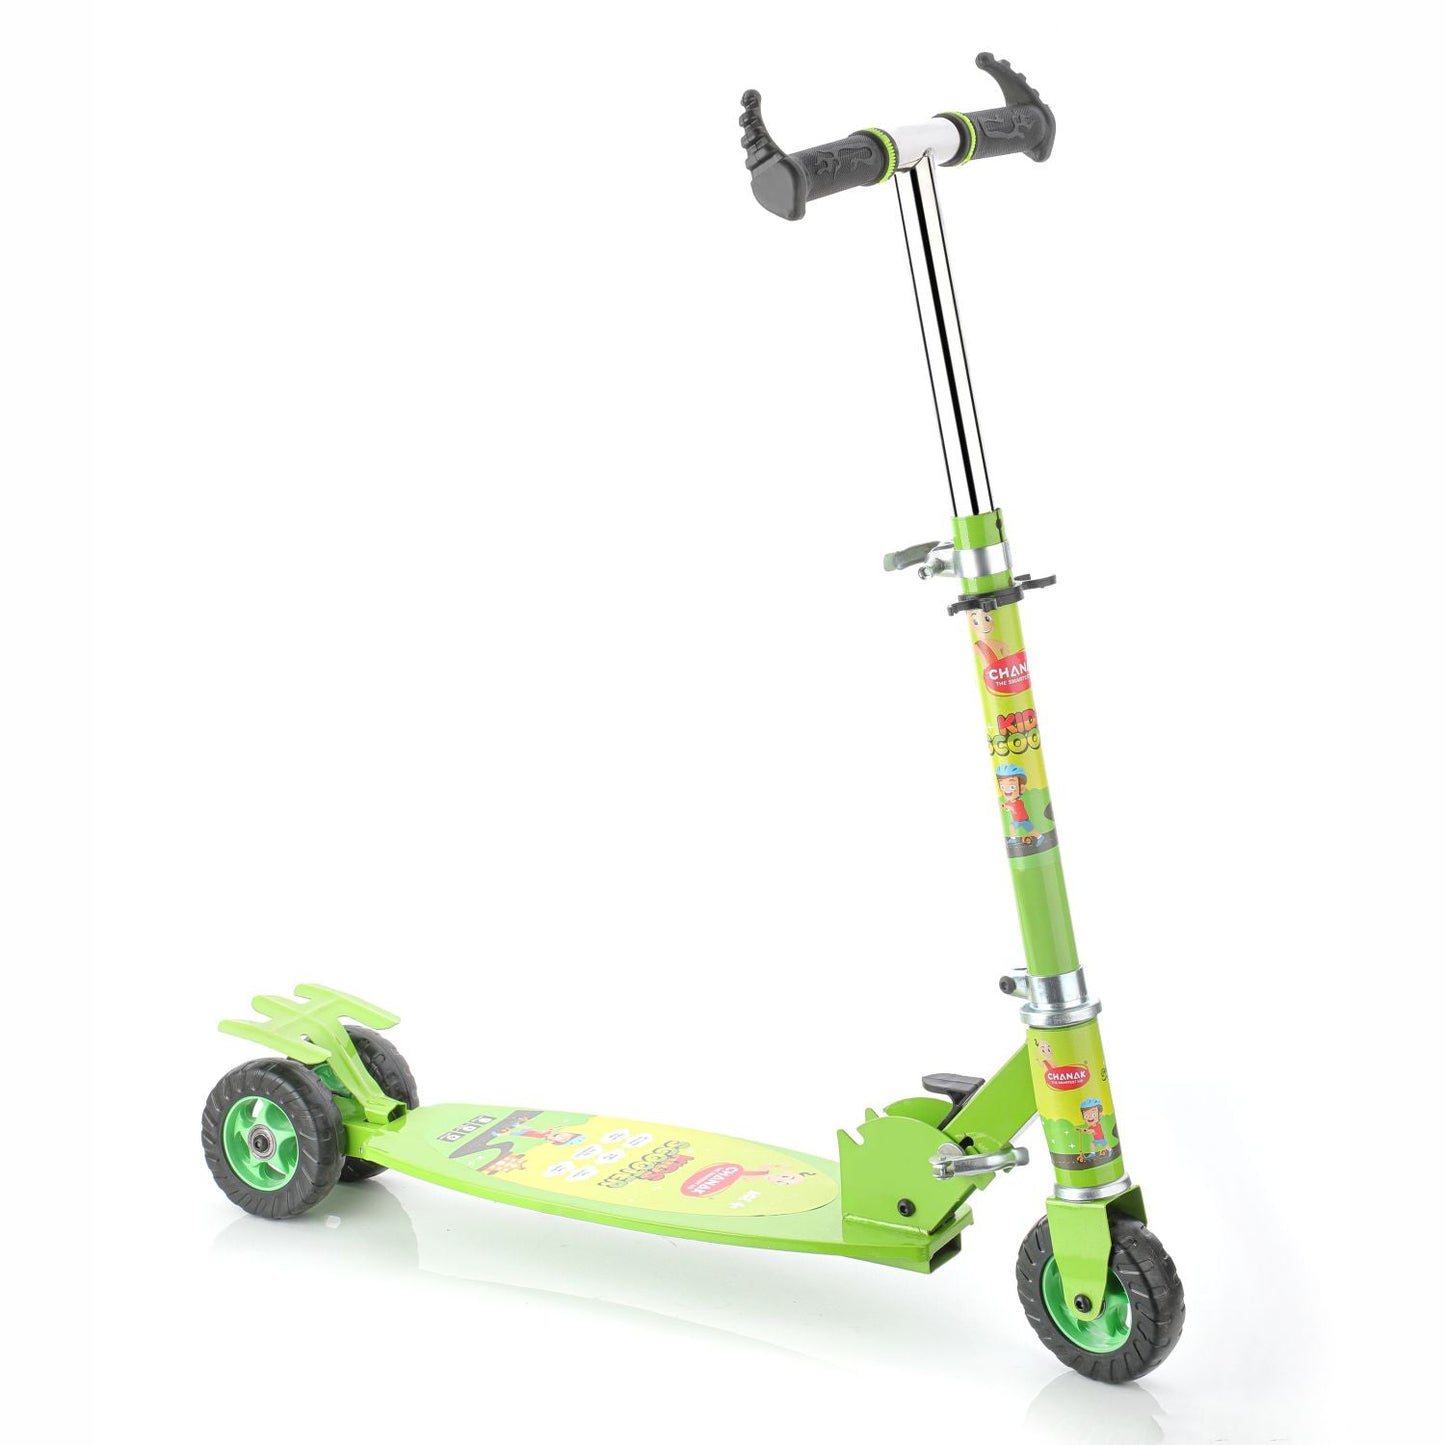 Chanak Kick Scooter for kids Glider Toddler Scooter